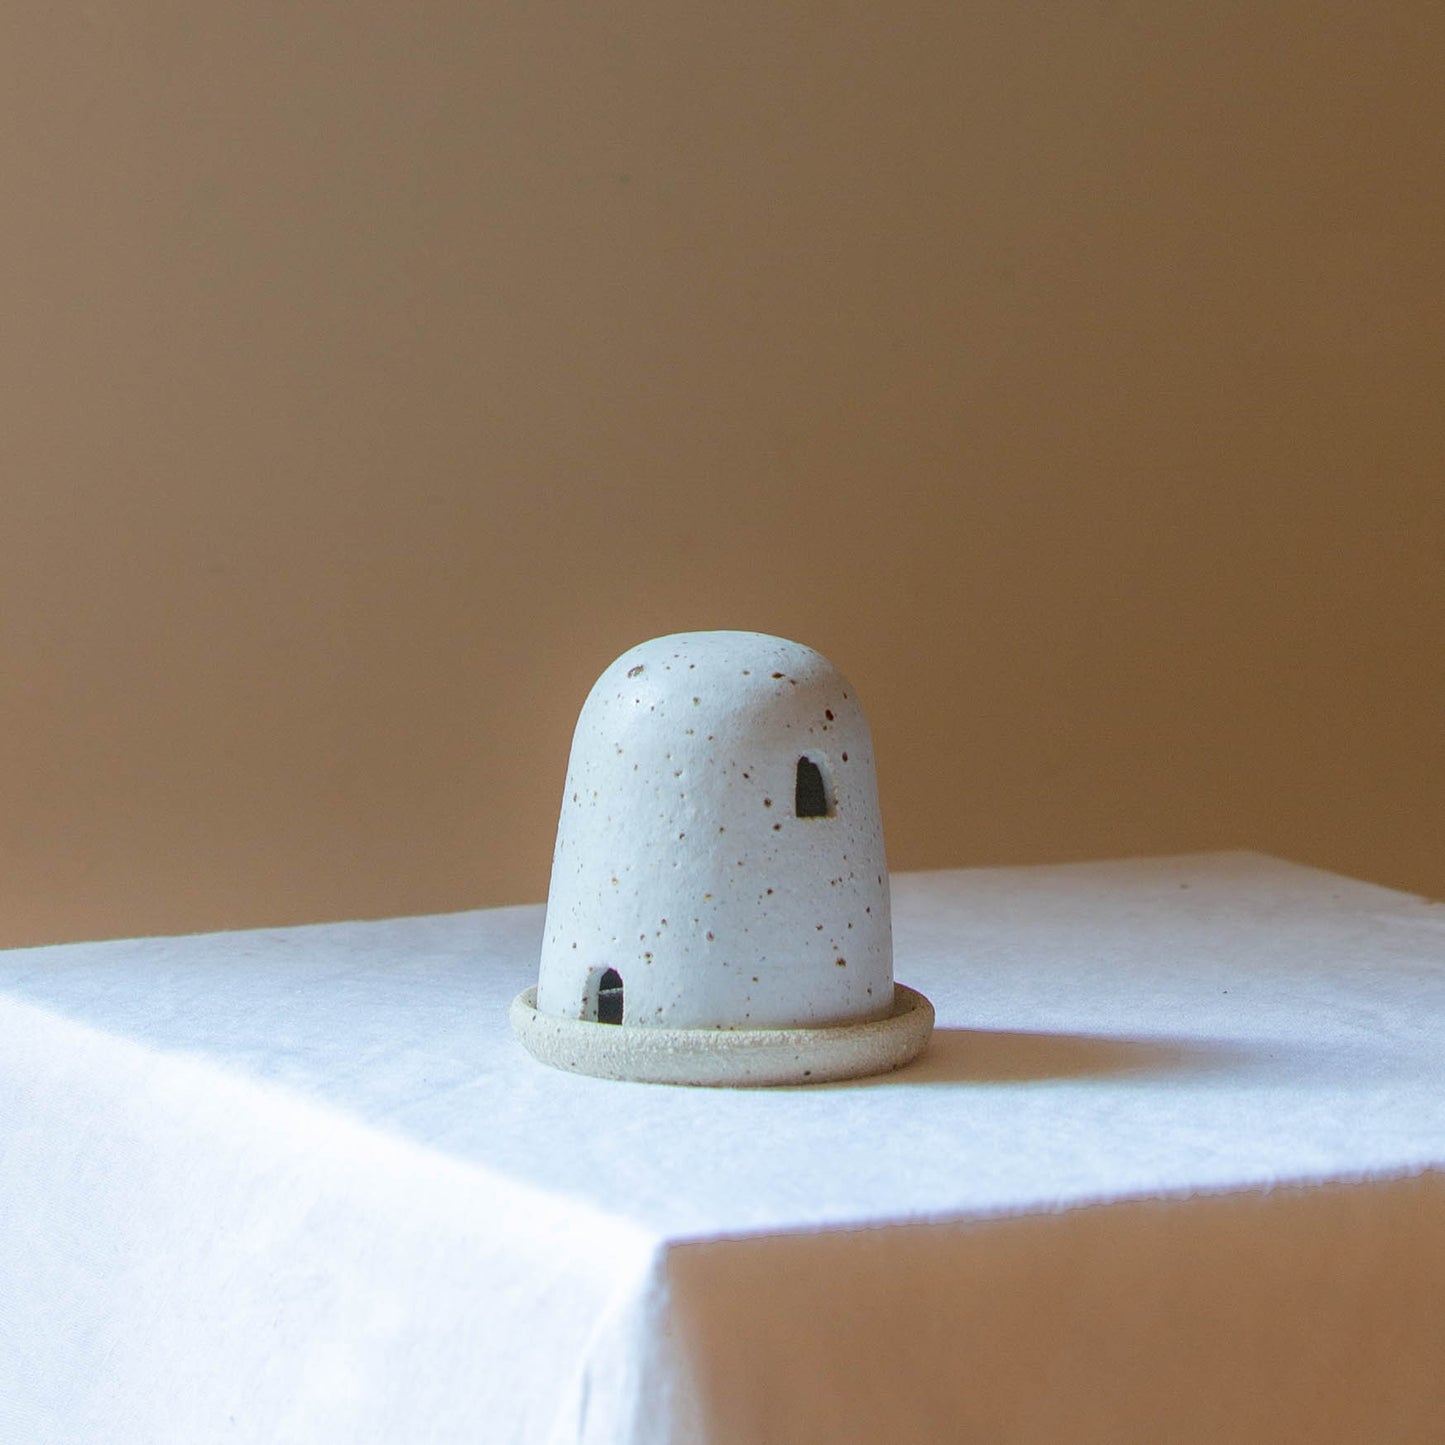 A Dome Burner in speckled cream glaze sitting on a white plinth. The dome burner has a smooth dome top with hand carved windows and sits on a dish.